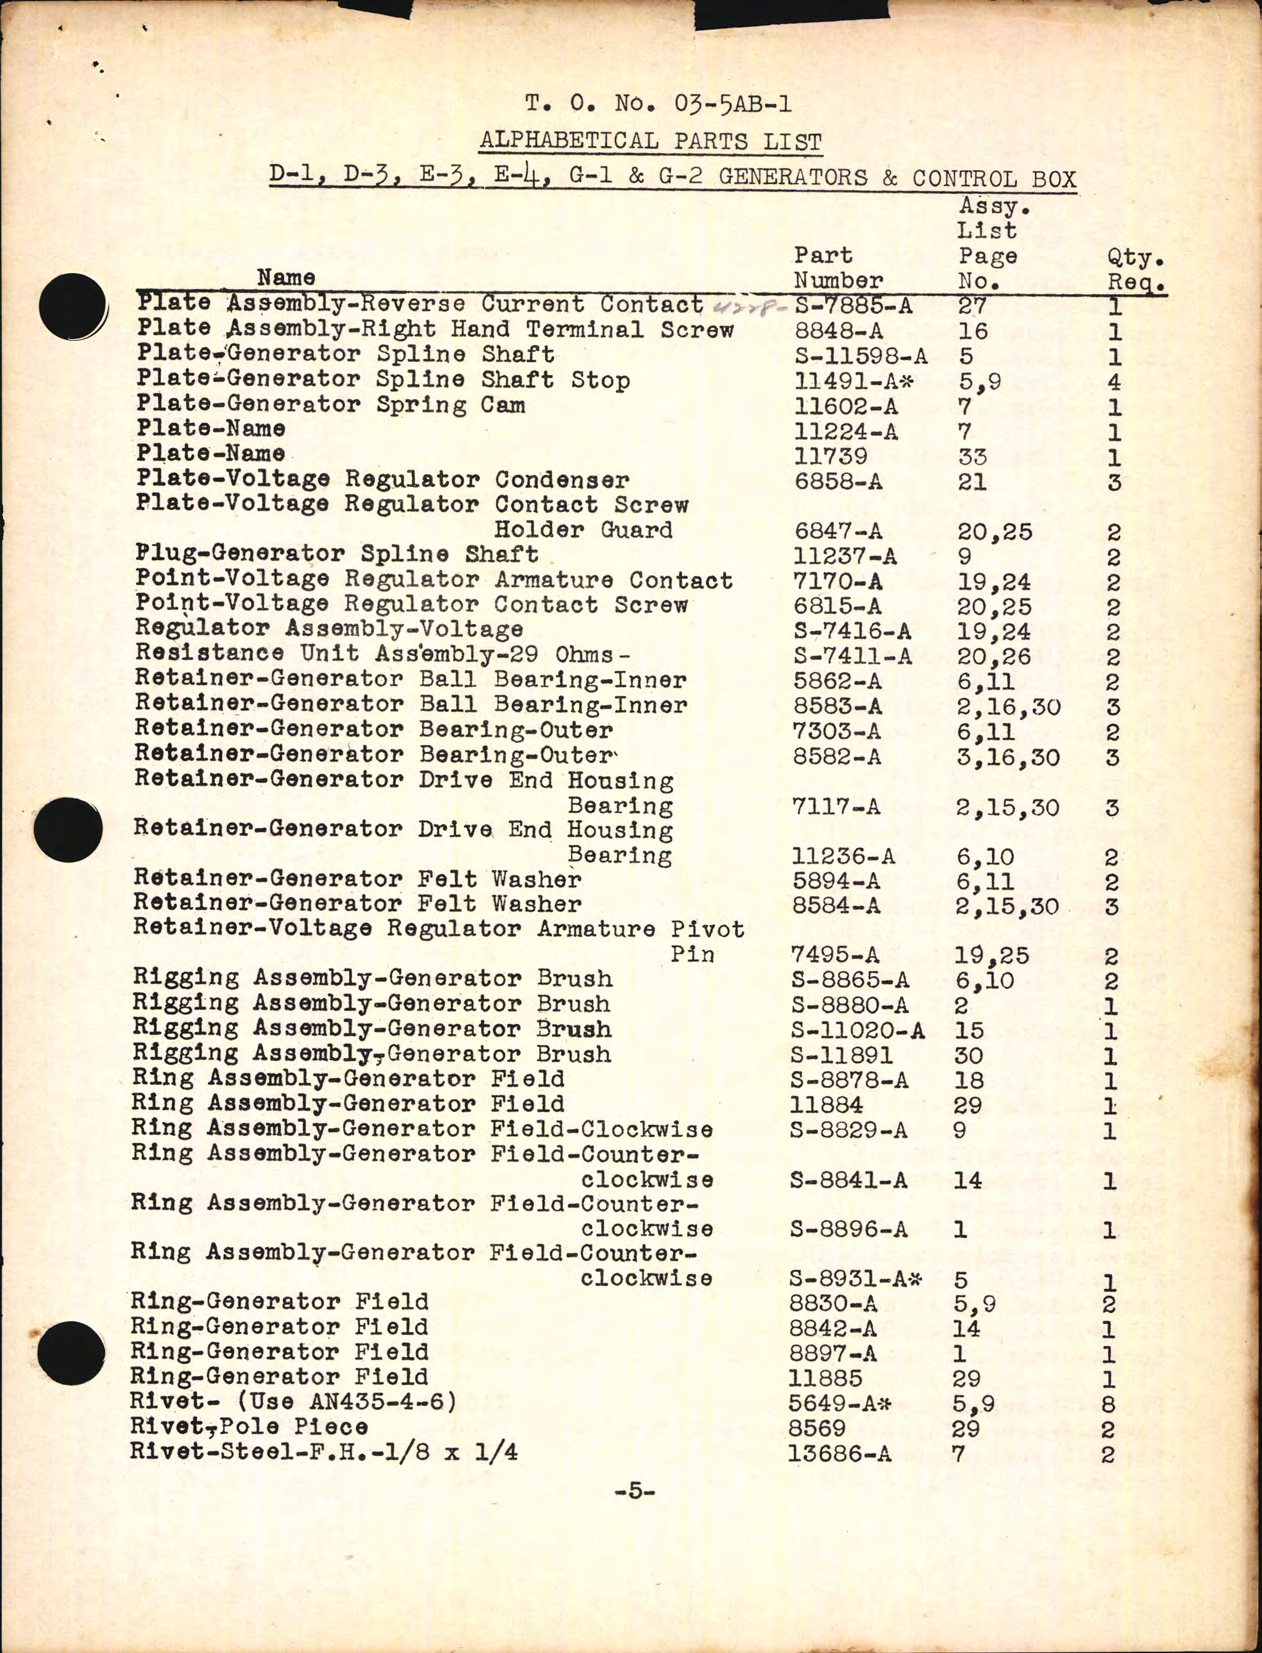 Sample page 5 from AirCorps Library document: Alphabetical Parts List for D-1, D-3, E-3, G-1, and G-2 Generators and Control Box